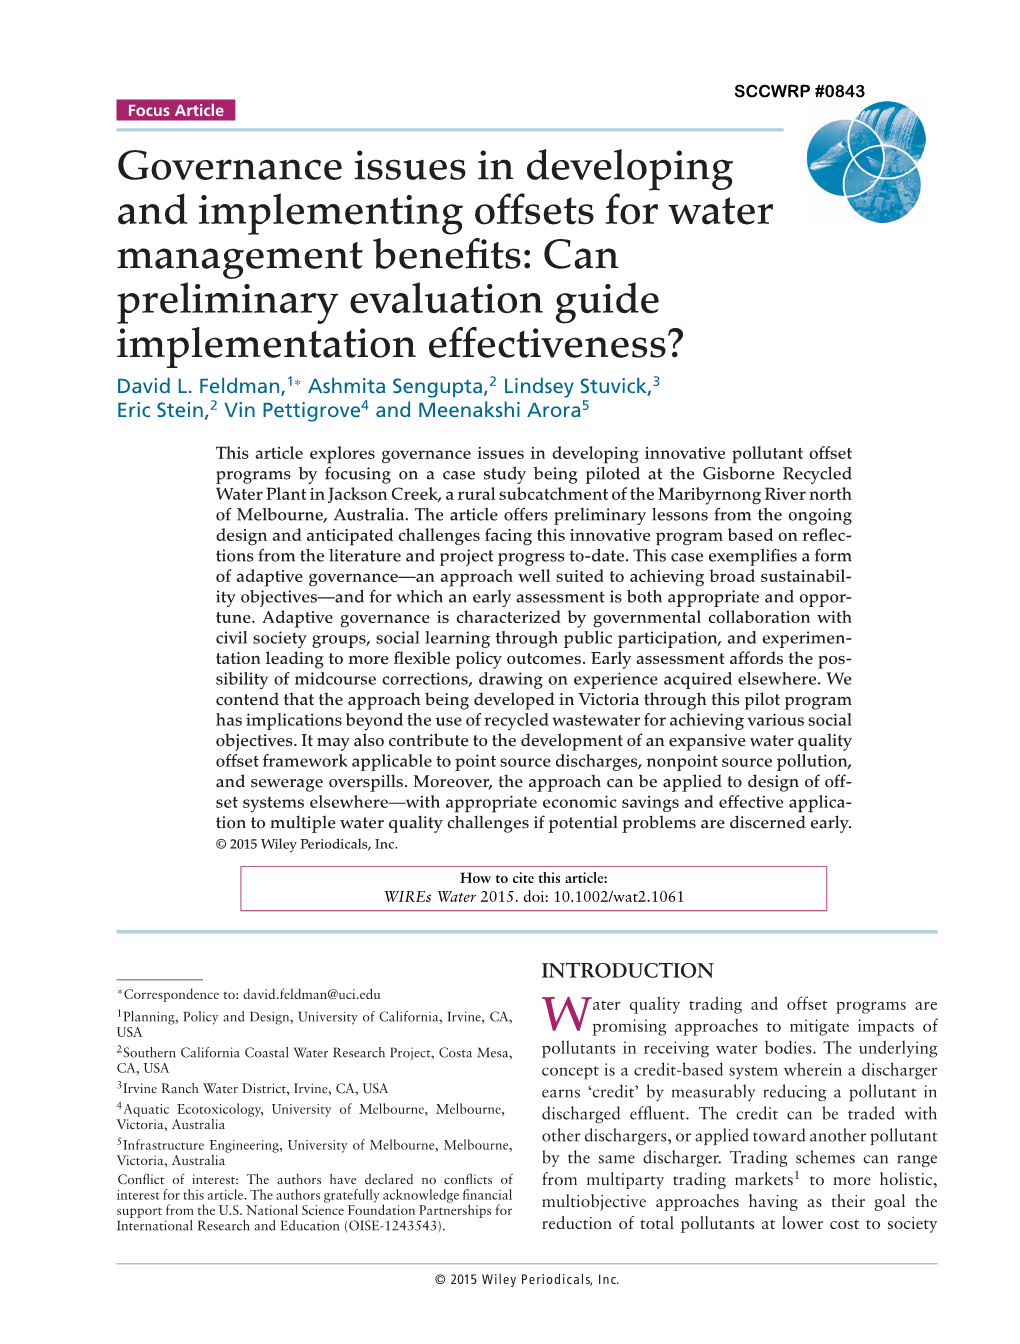 Governance Issues in Developing and Implementing Offsets for Water Management Beneﬁts: Can Preliminary Evaluation Guide Implementation Effectiveness? David L